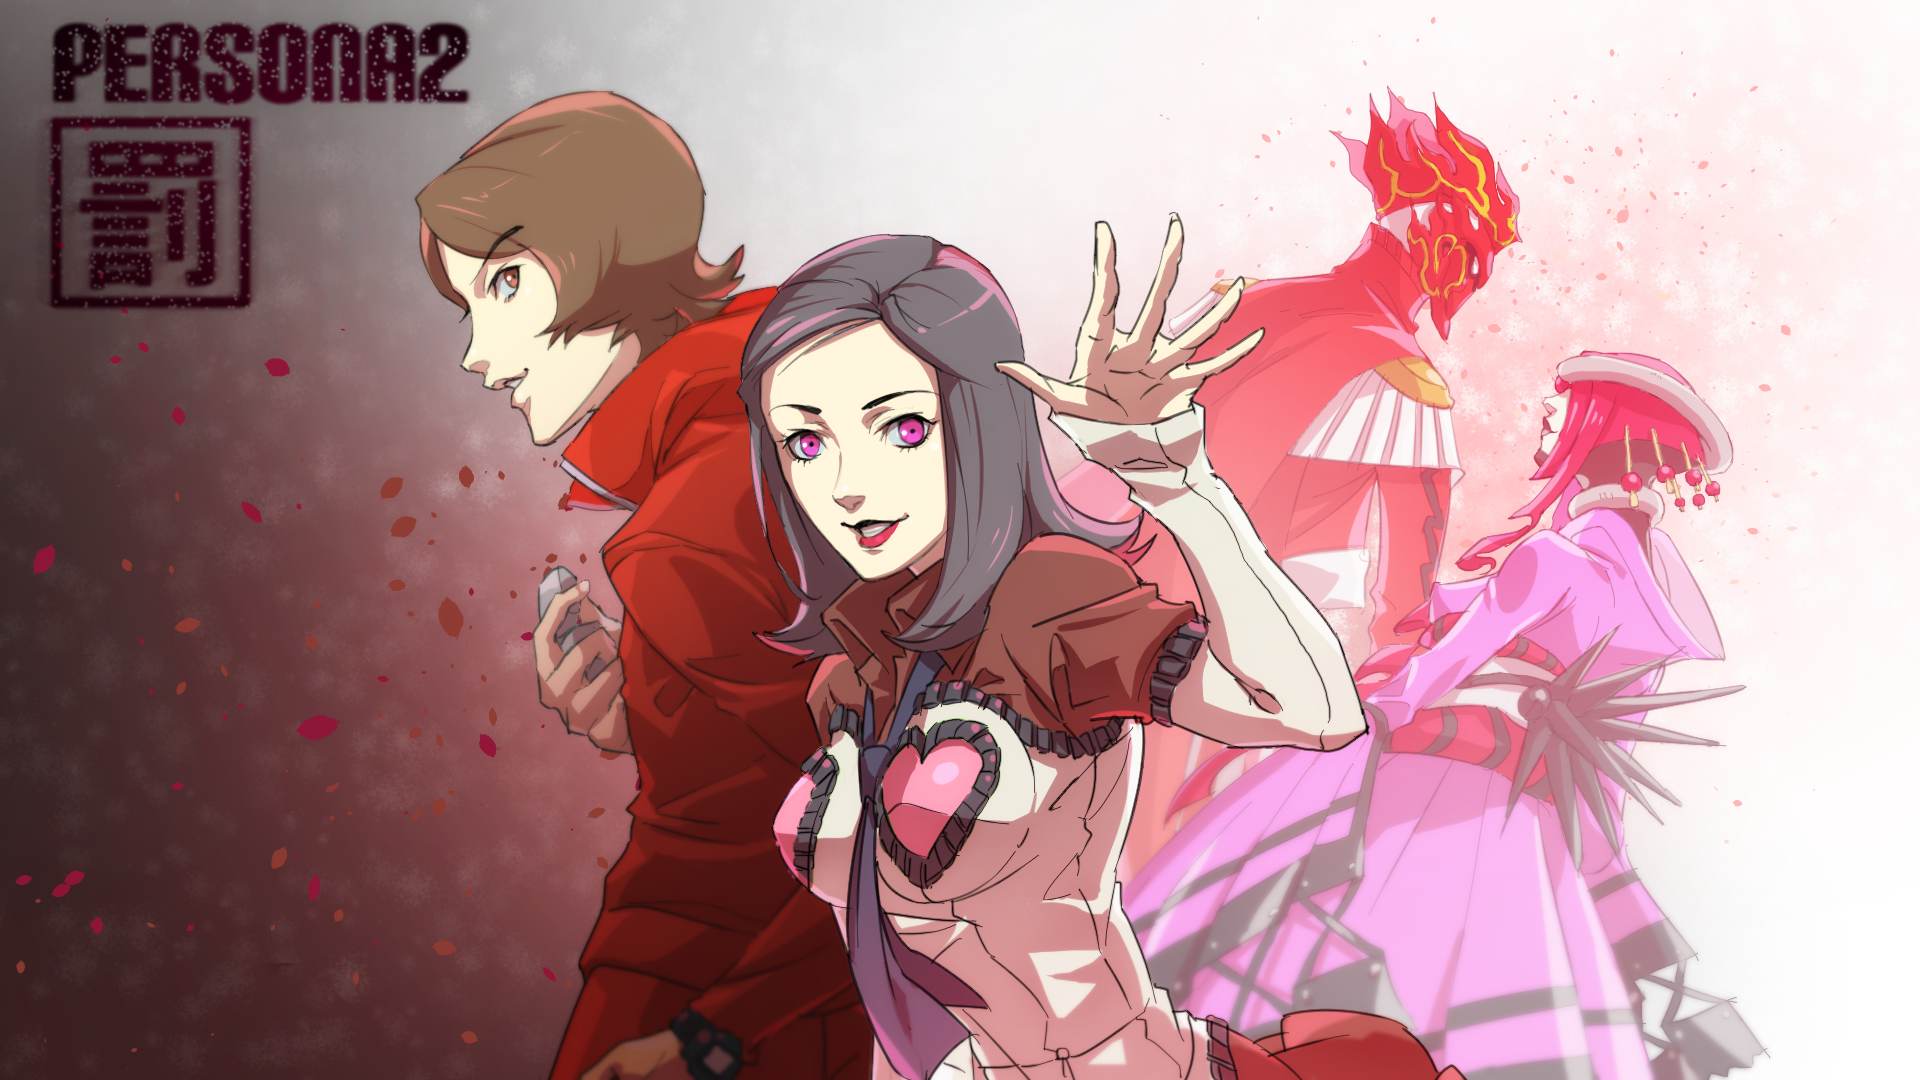 Video Game Persona 2 1920x1080